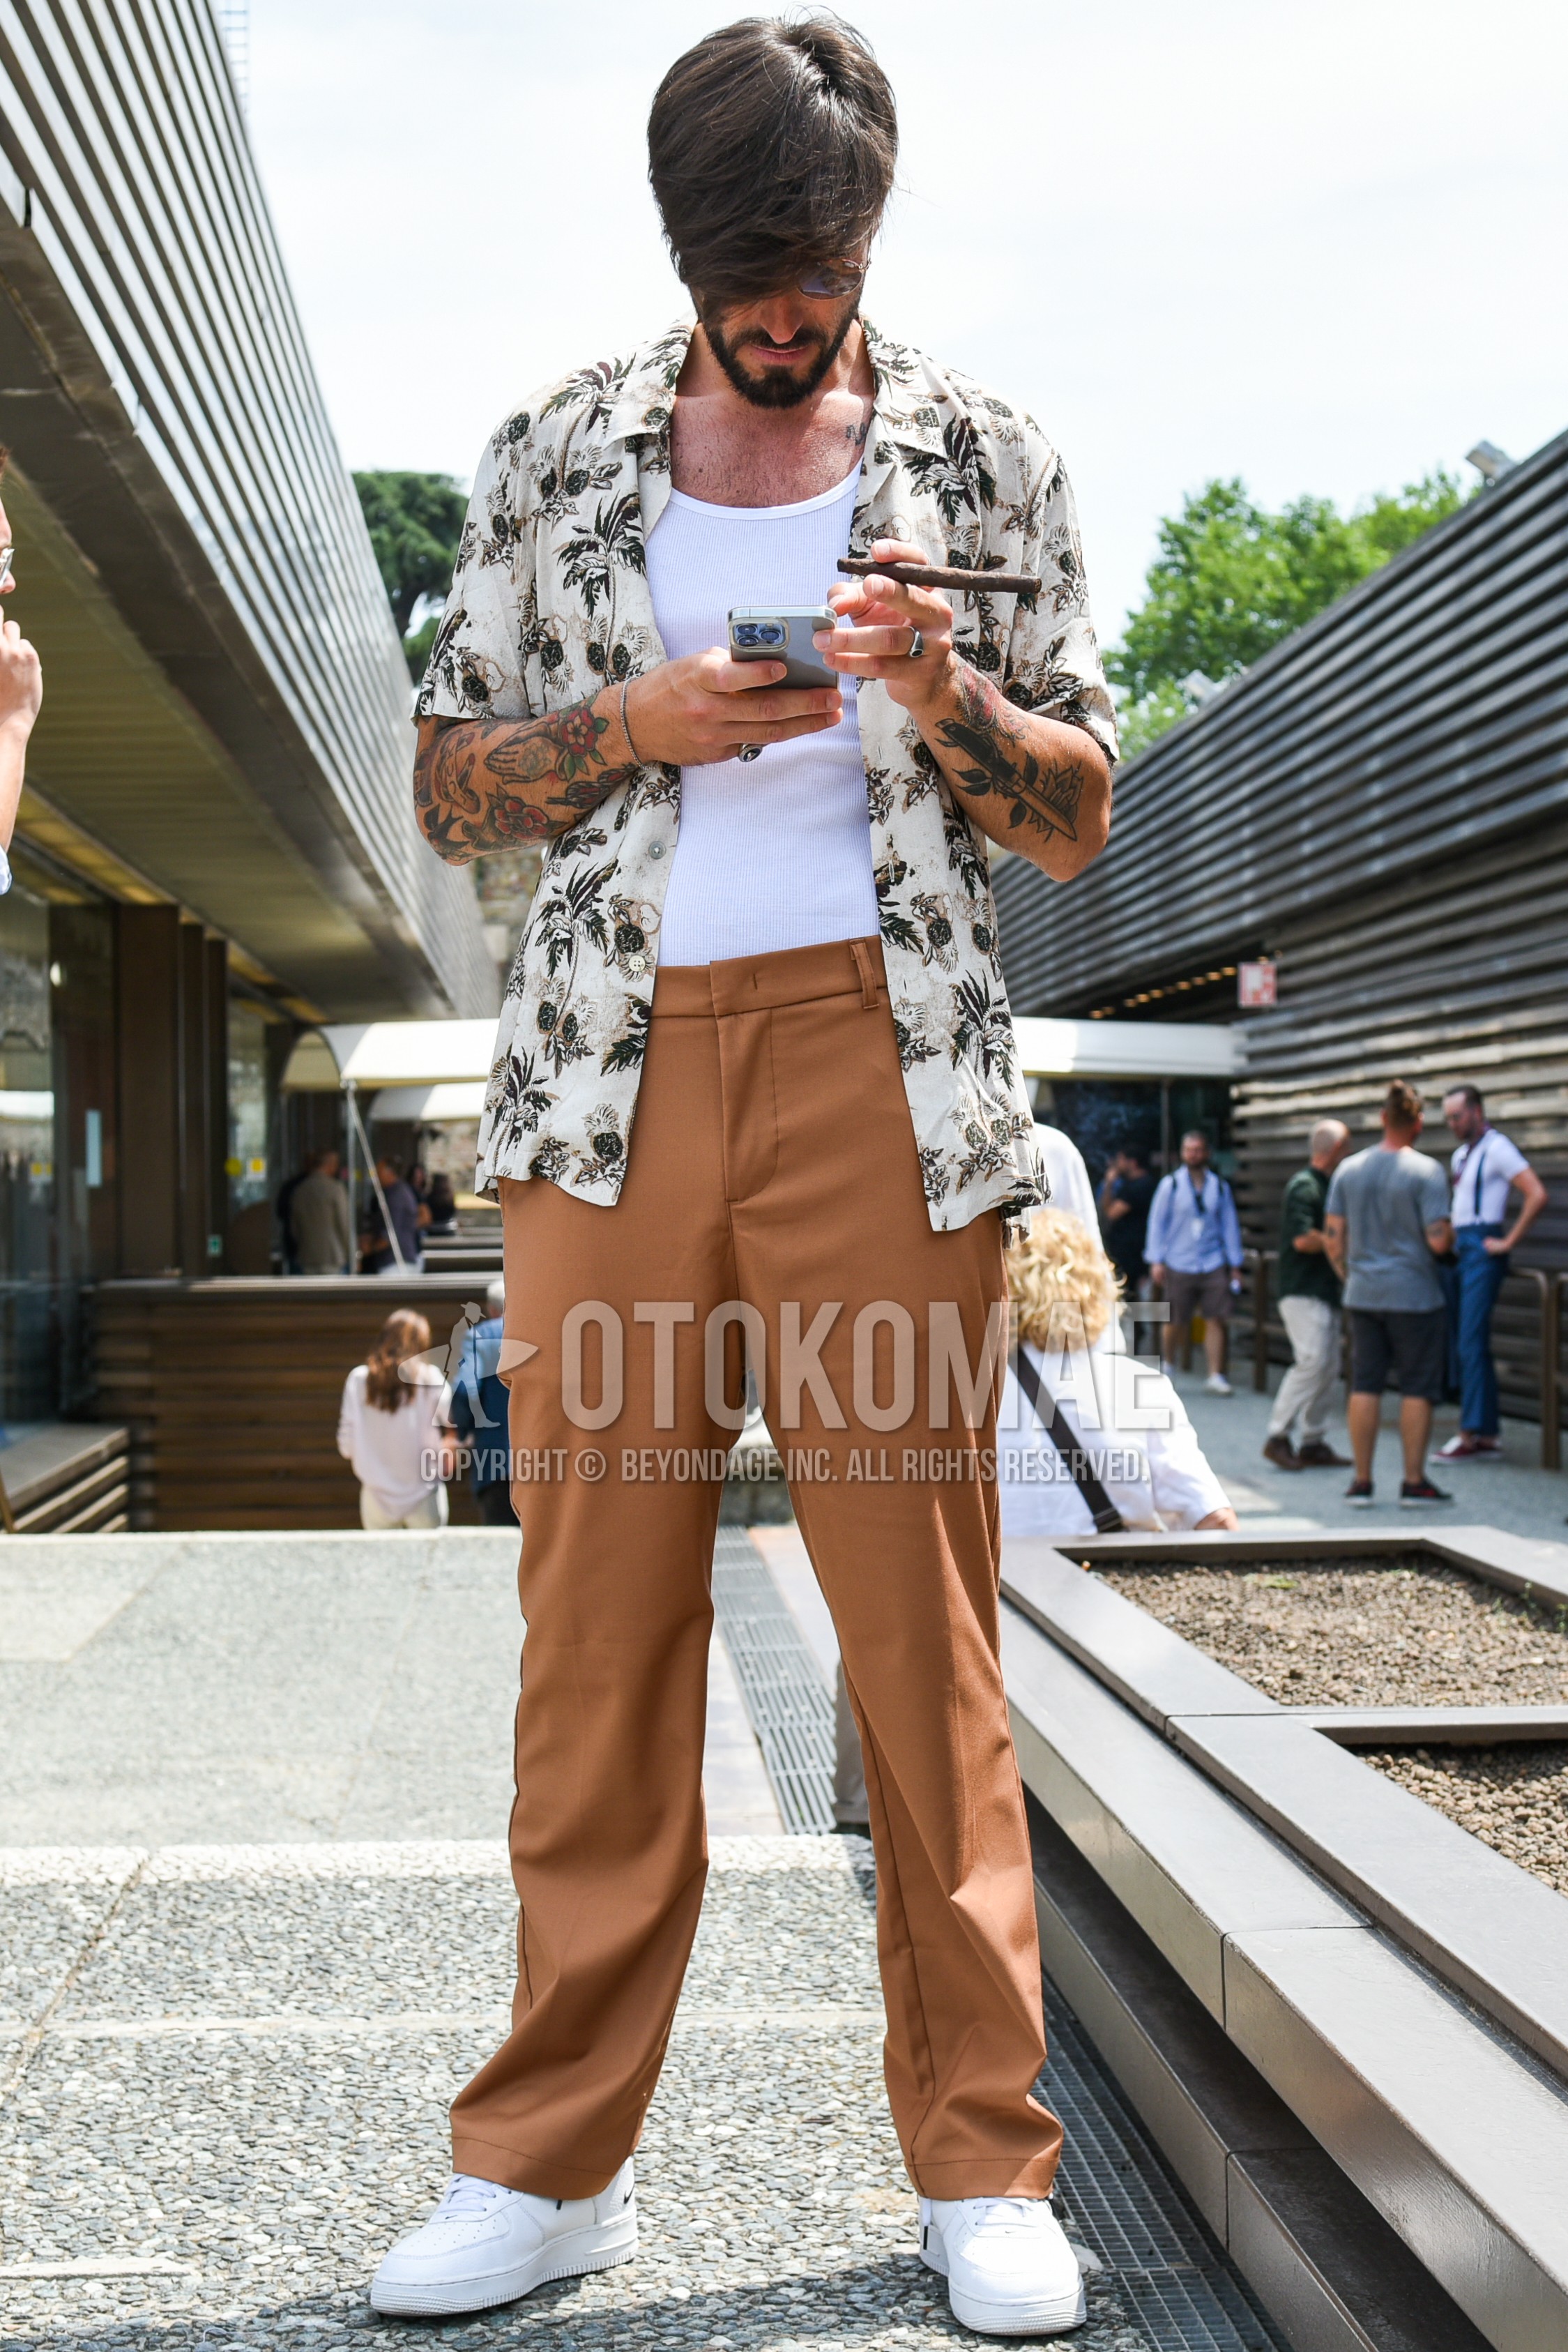 Men's spring summer outfit with black plain sunglasses, beige tops/innerwear shirt, white plain t-shirt, brown plain chinos, white low-cut sneakers.